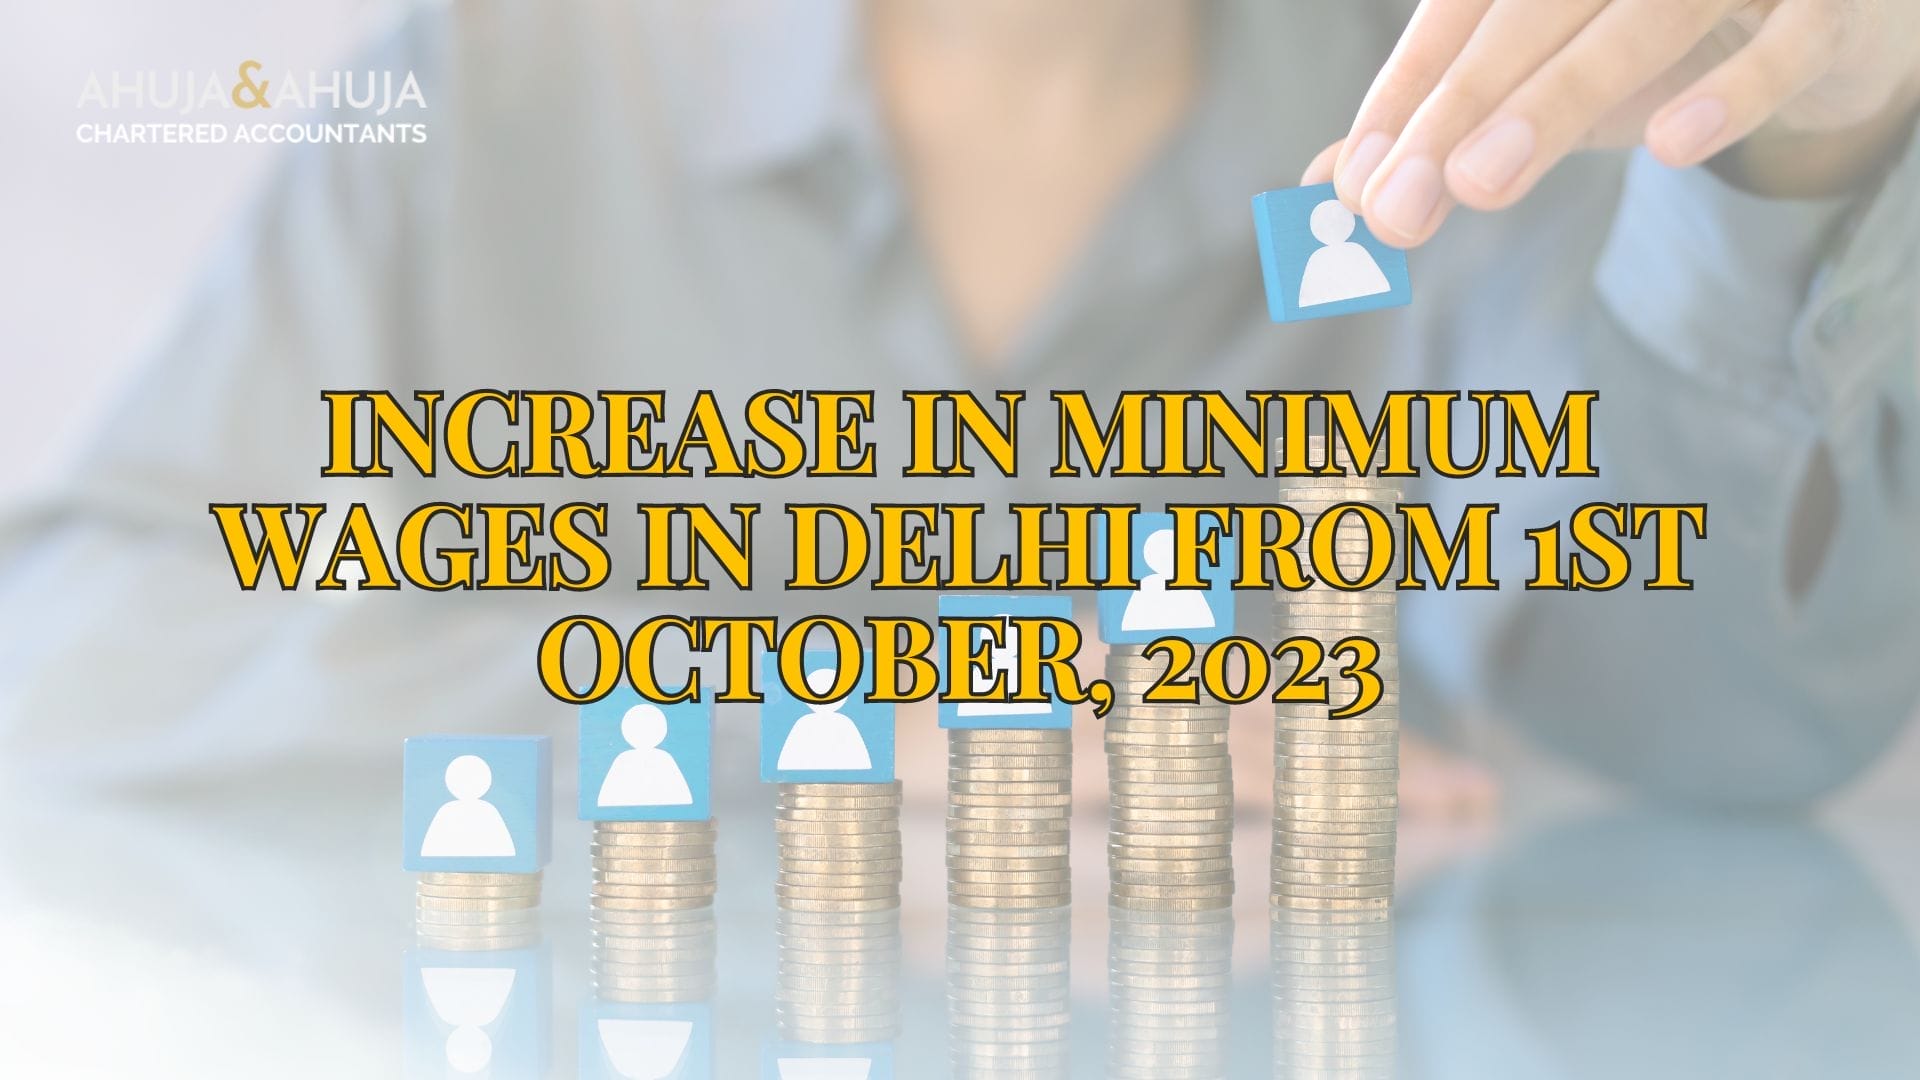 Increase in Minimum Wages in Delhi from 1st October, 2023